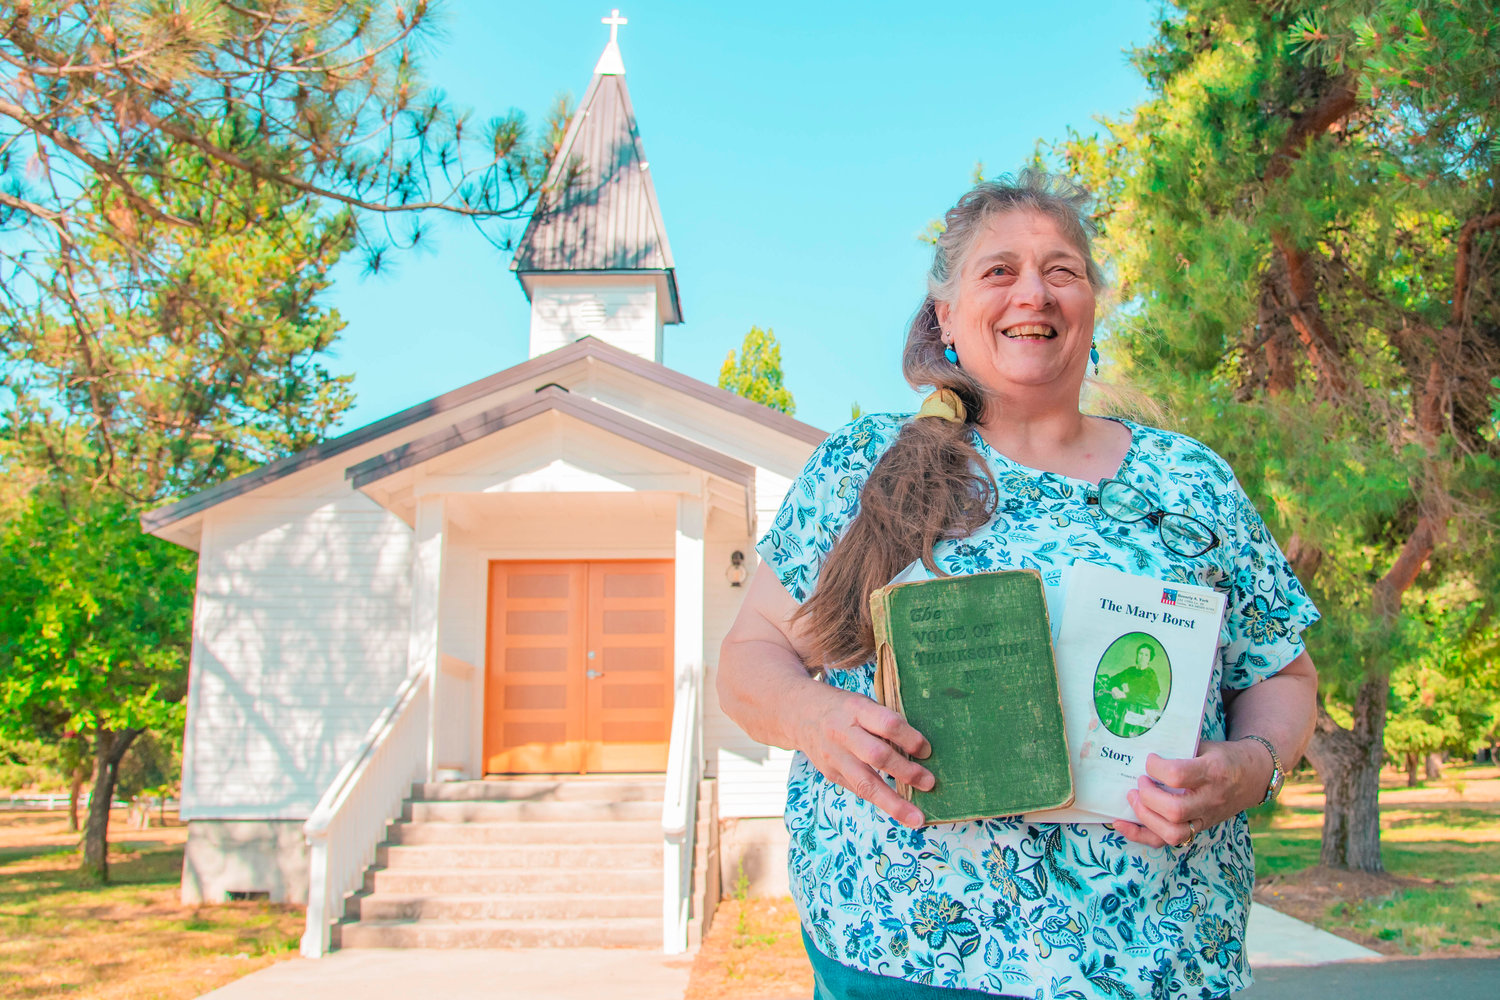 Beverly York smiles and poses for a photo in front of the Borst Park Pioneer Church Monday in Centralia.